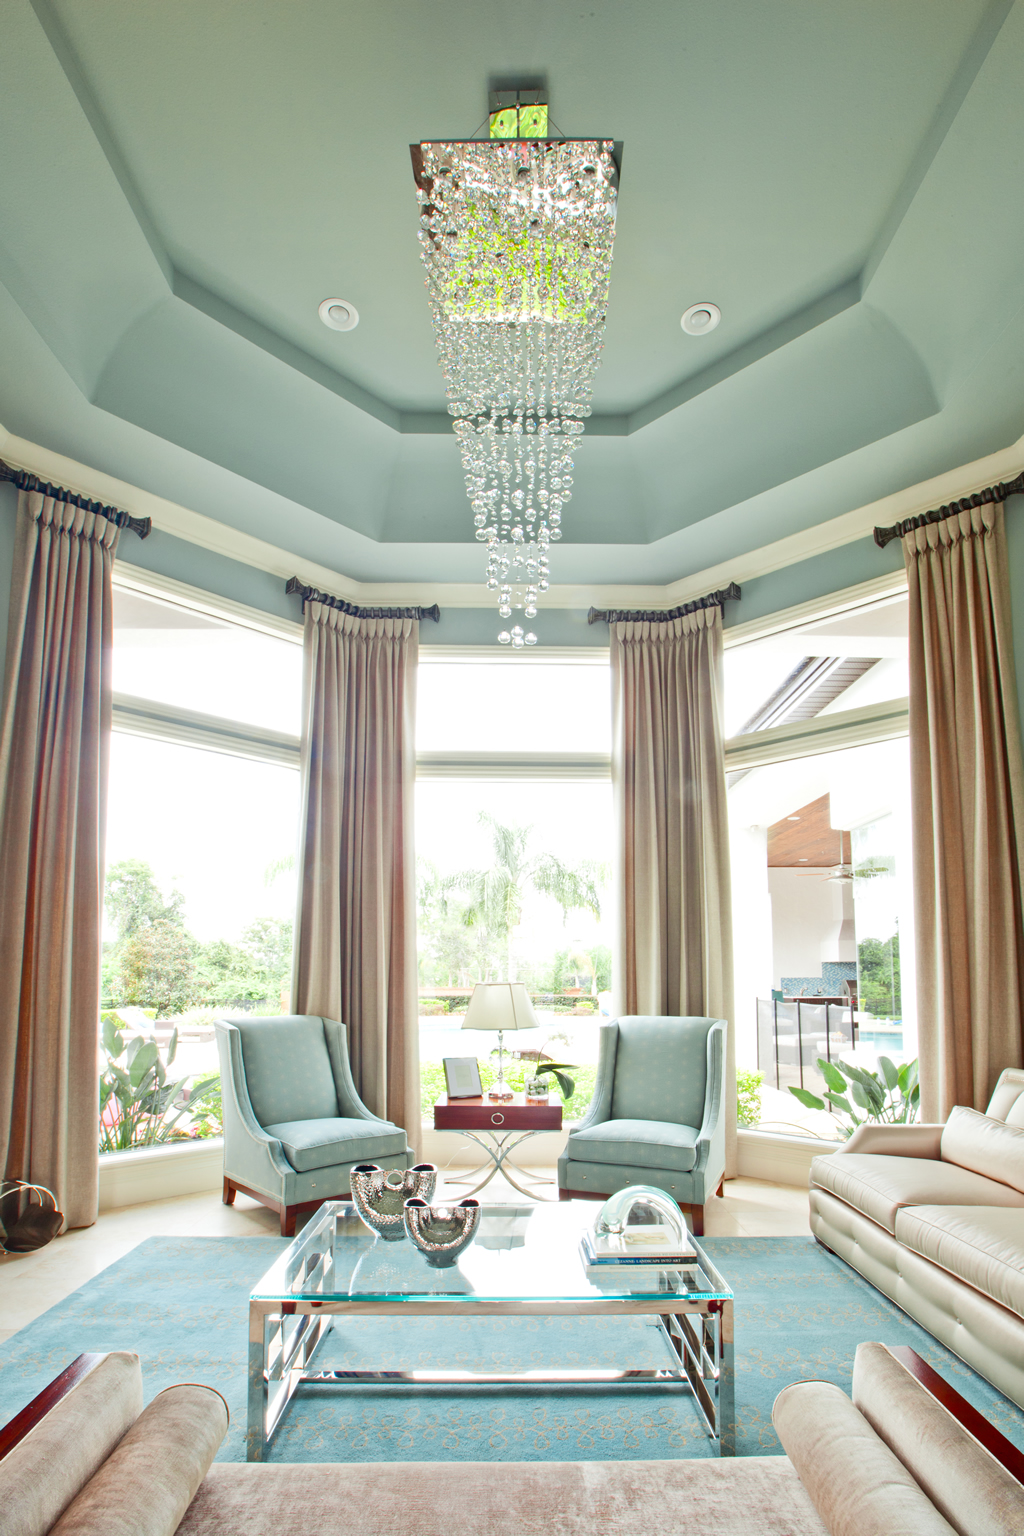 Chic furnished living room with chandelier